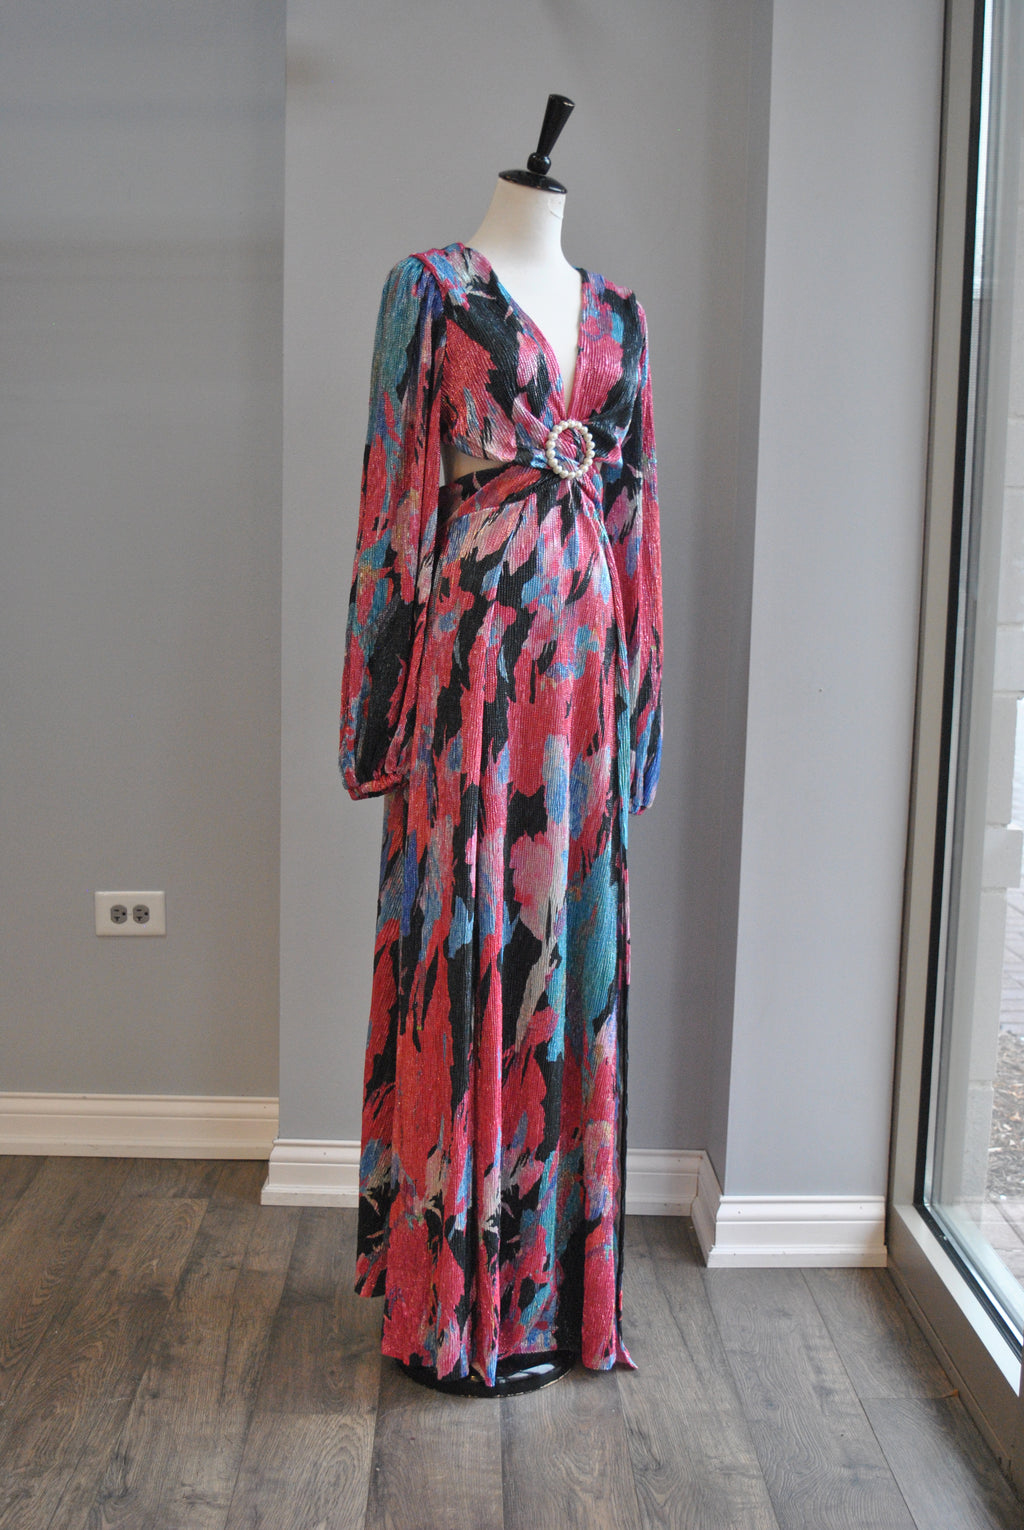 CLEARANCE - PINK MULTI LONG SUMMER DRESS WITH OPEN BACK AND SIDE SLIPS